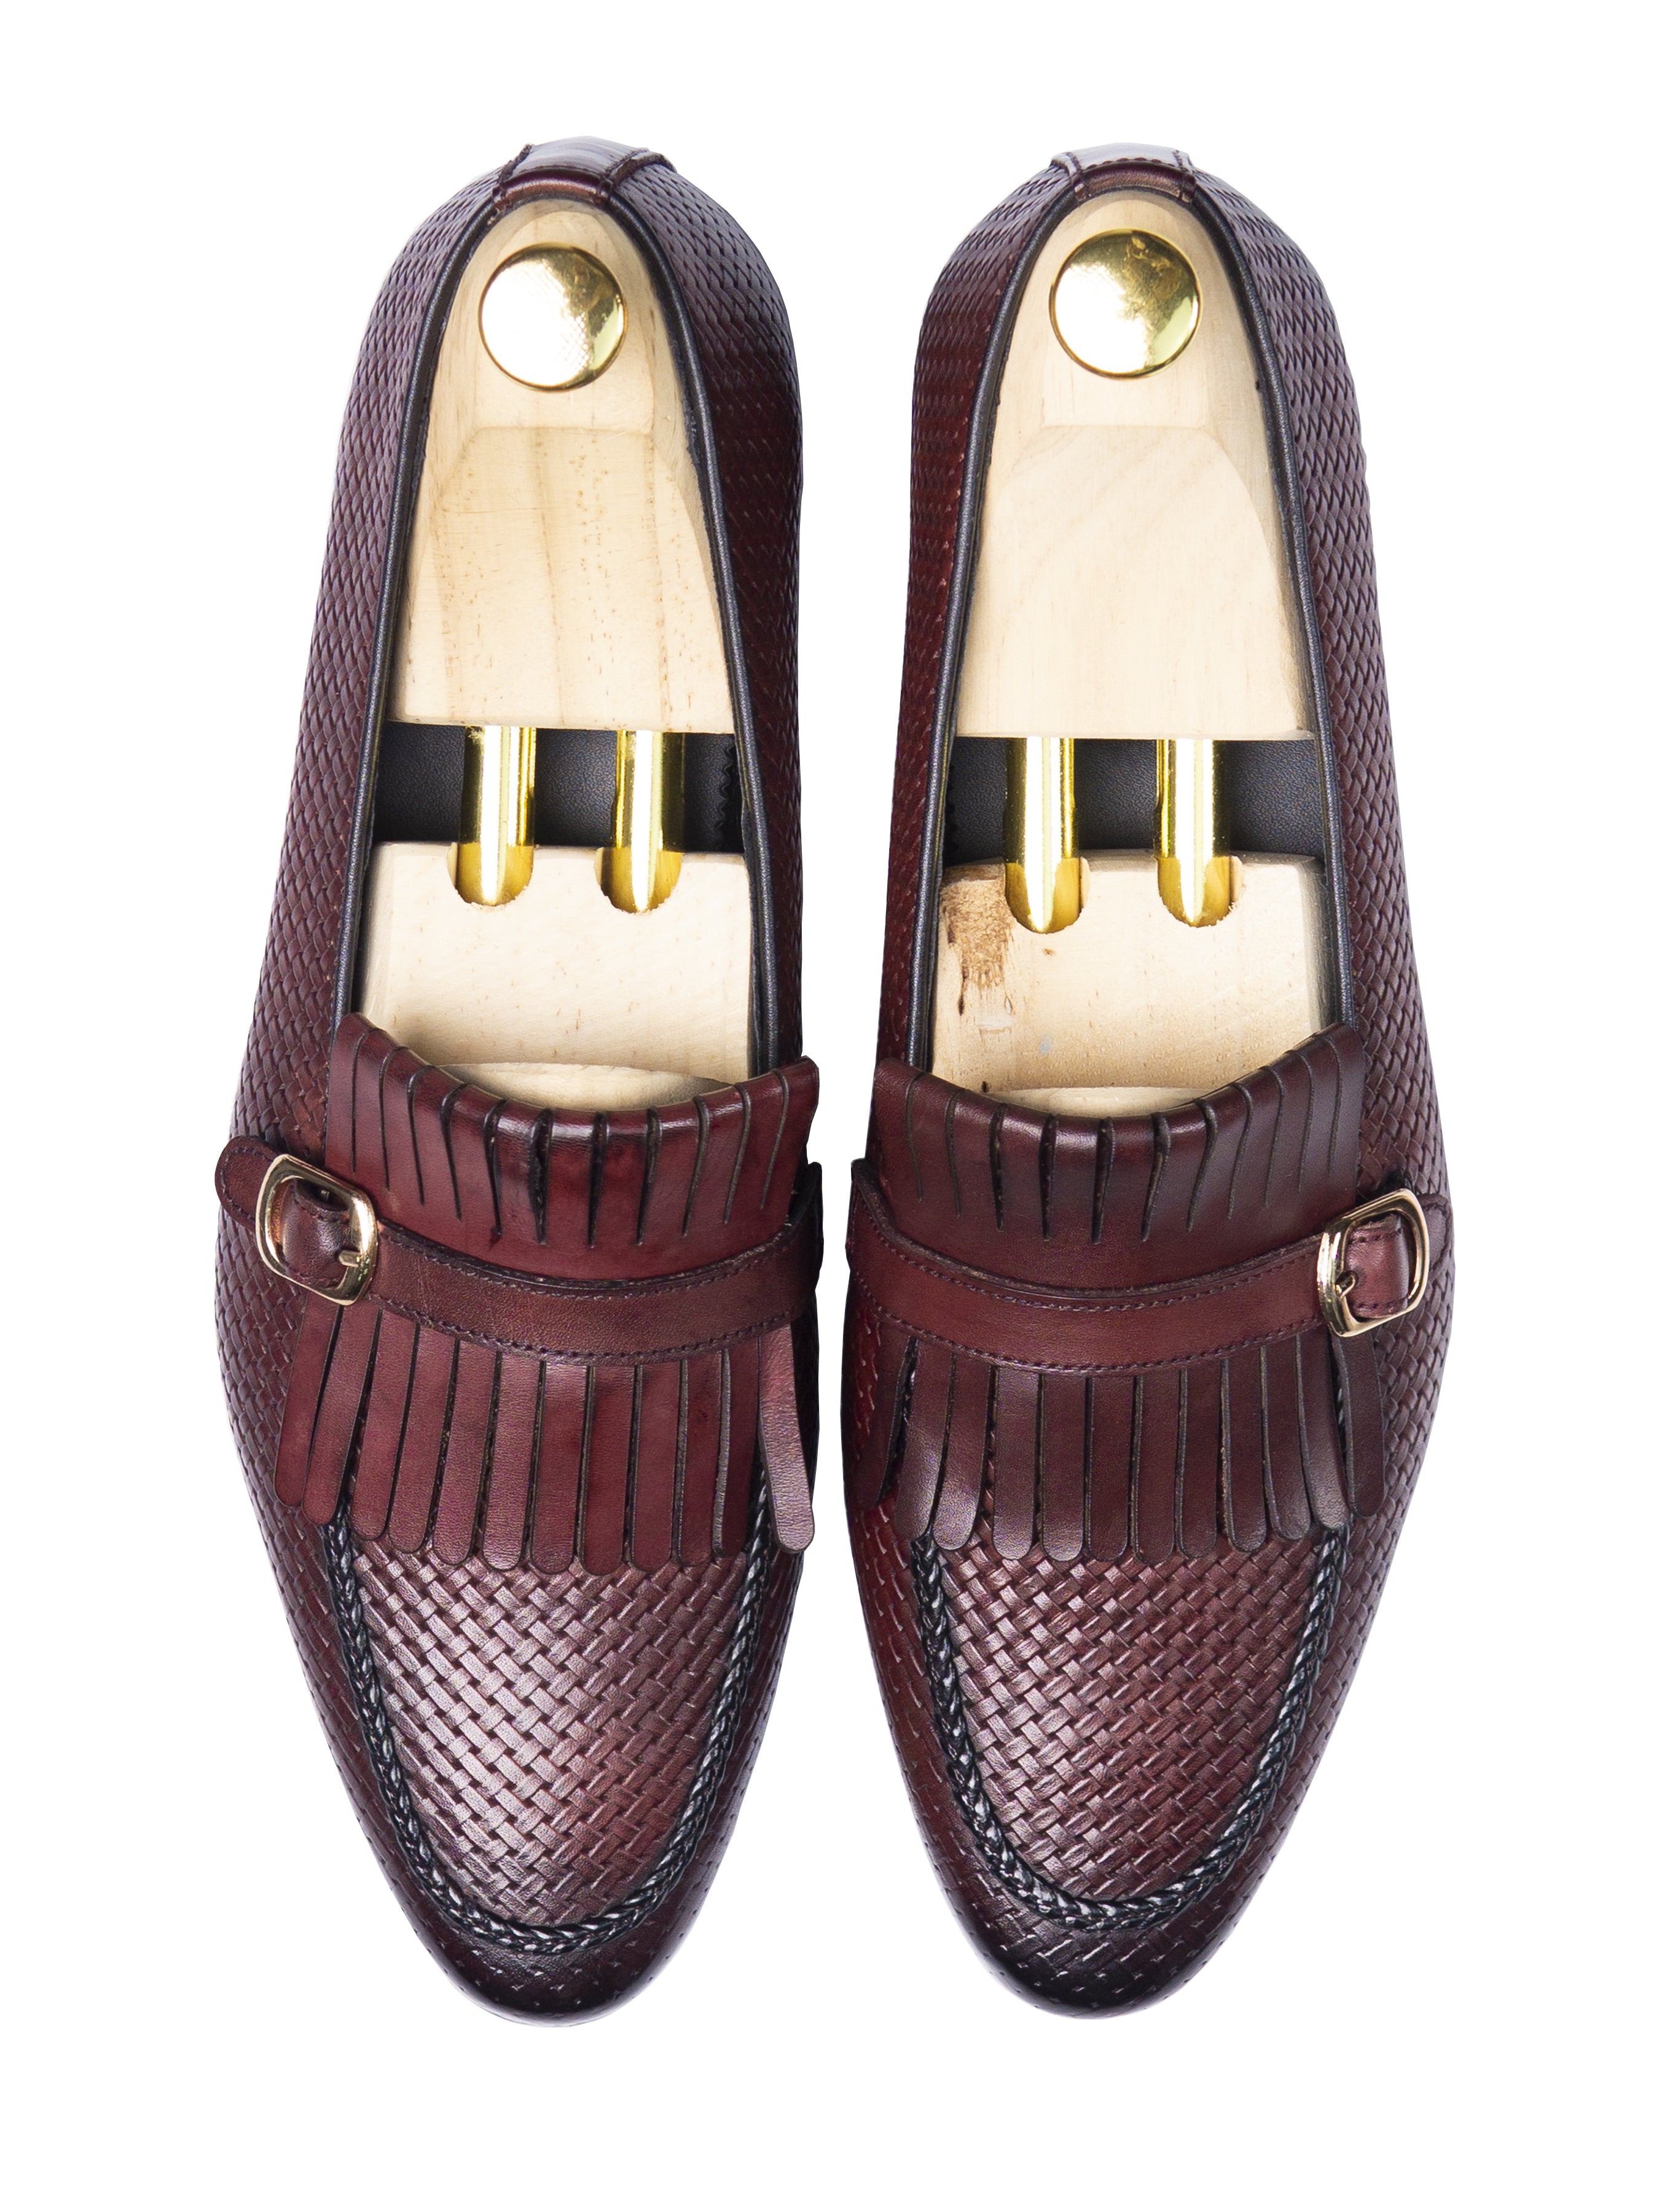 Fringe Kiltie Loafer - Red Burgundy Woven Leather with Side Buckle (Hand Painted Patina) - Zeve Shoes